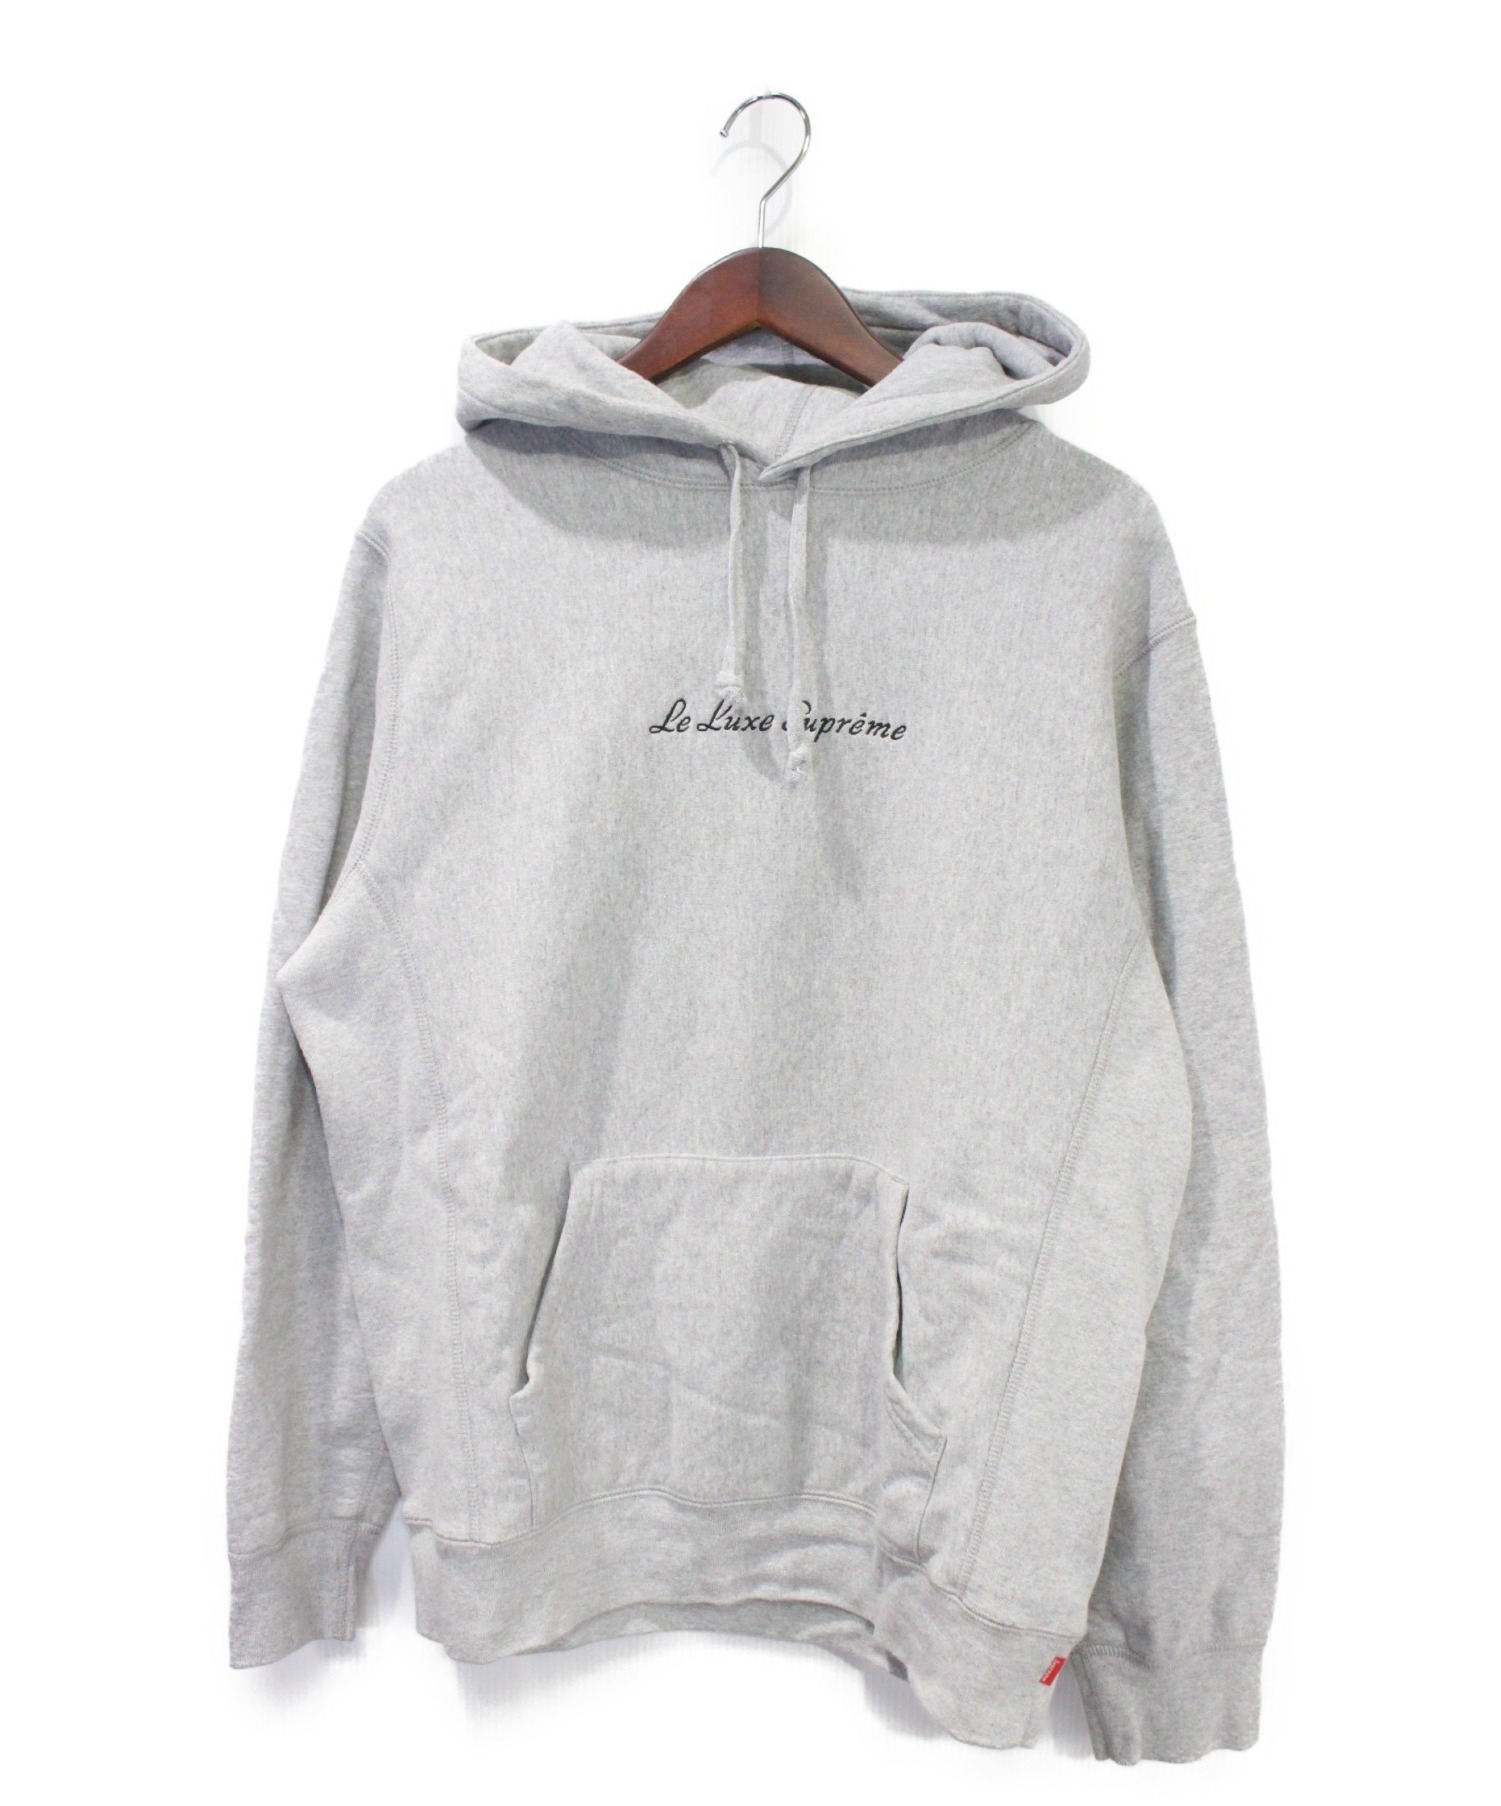 Supreme Le Luxe Hooded パーカー Lサイズ グレーシュプリーム